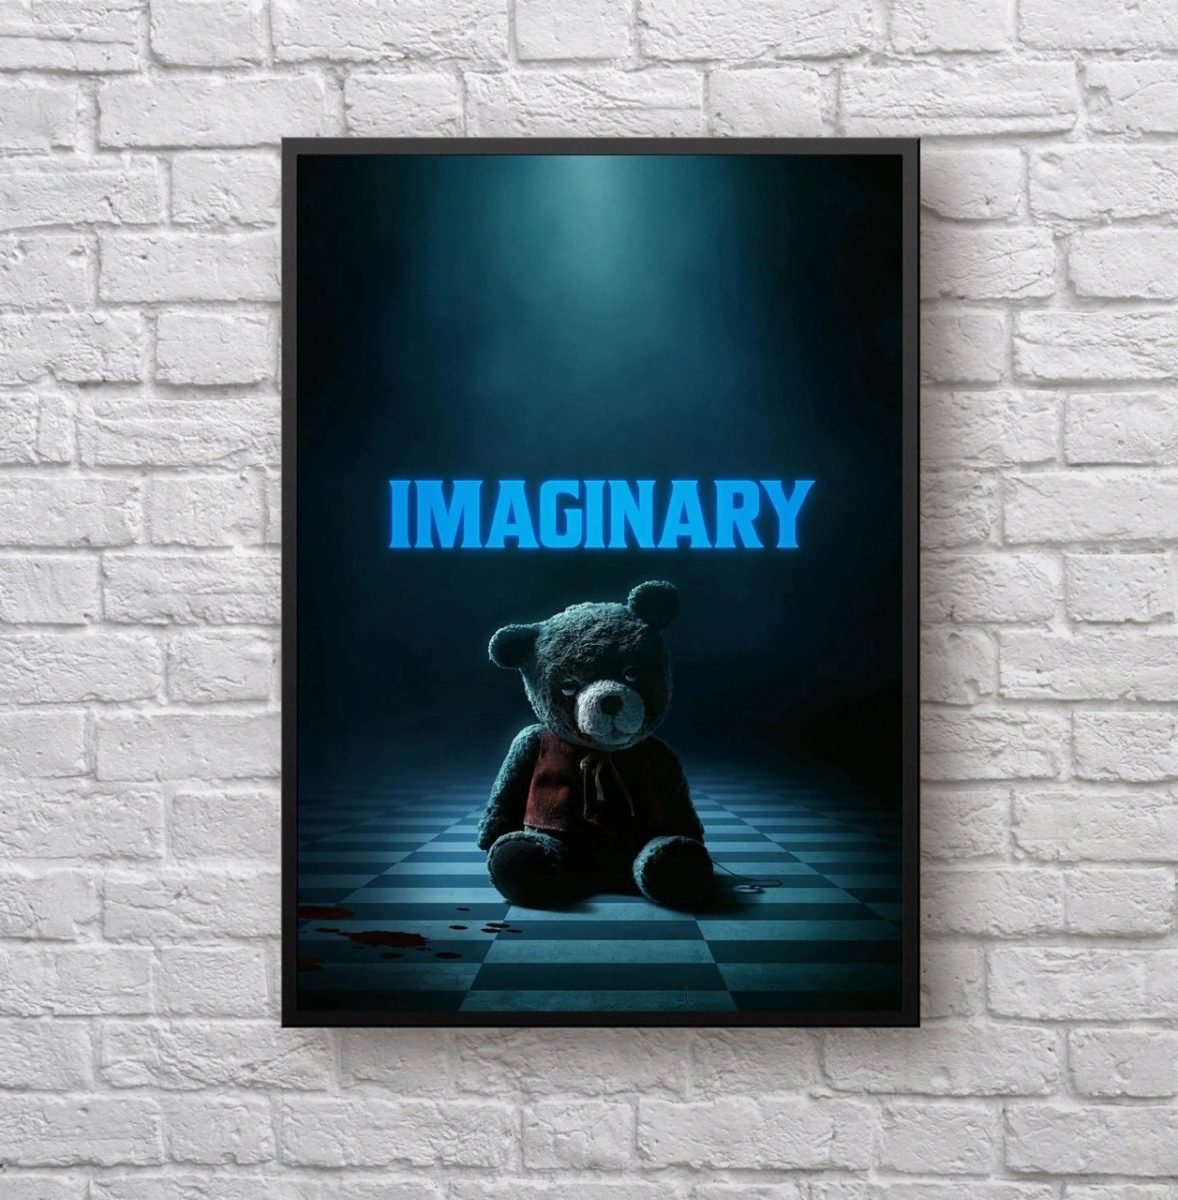 A poster hangs on a wall, displaying an image of Chauncey Bear, featured in the film “Imaginary”. Chauncey was a key character in the film and provided many frights for viewers.